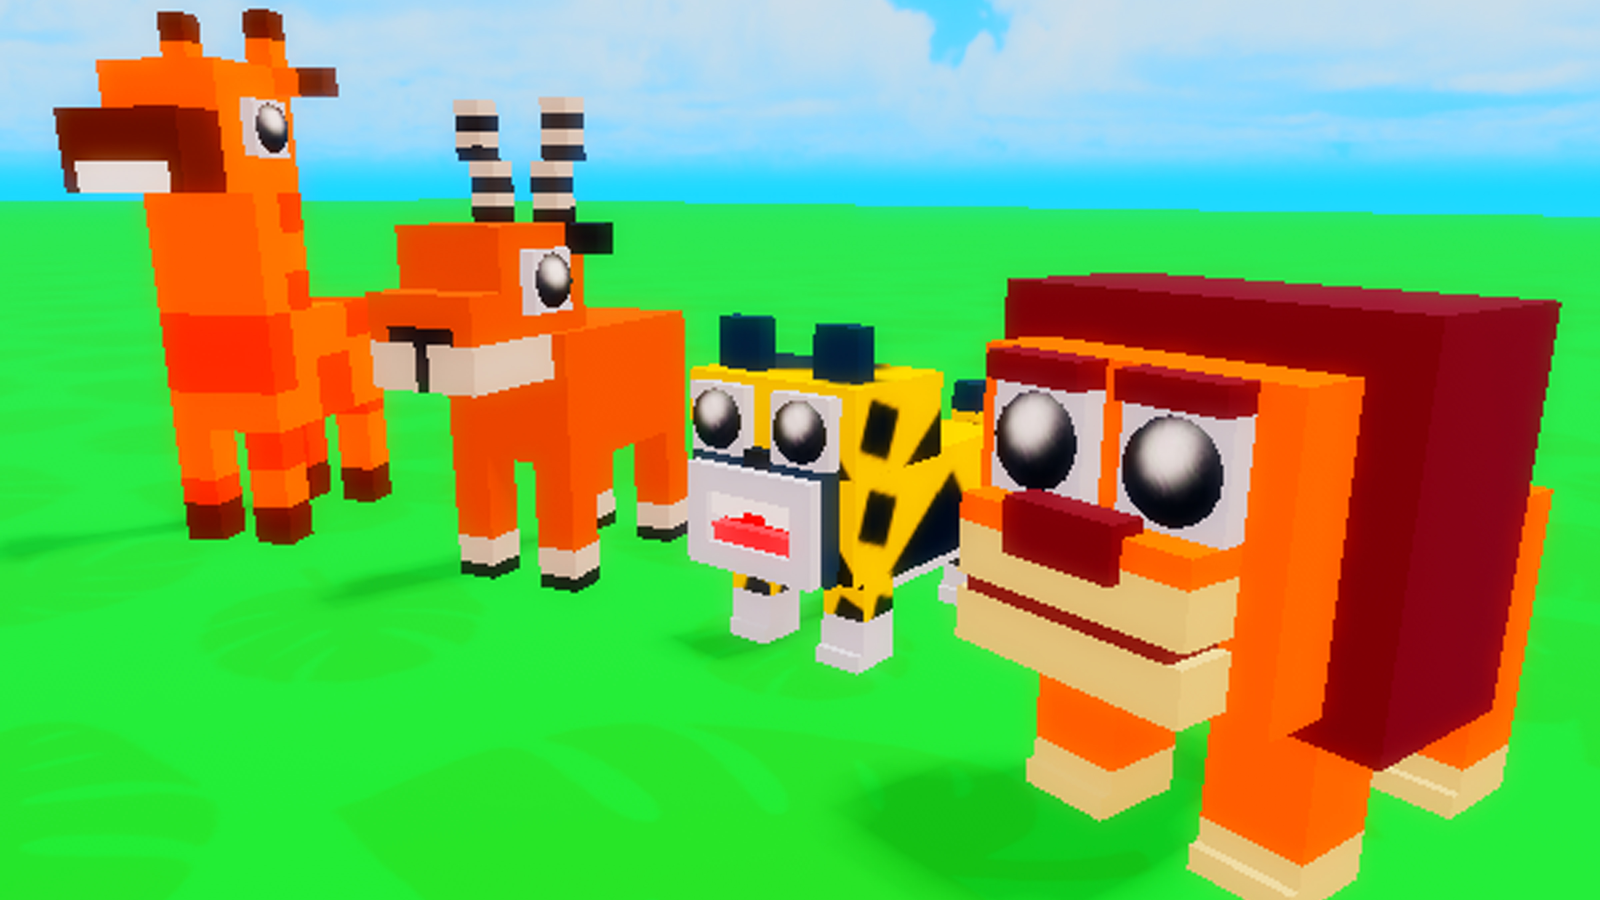 Roblox: Collect All Pets Codes